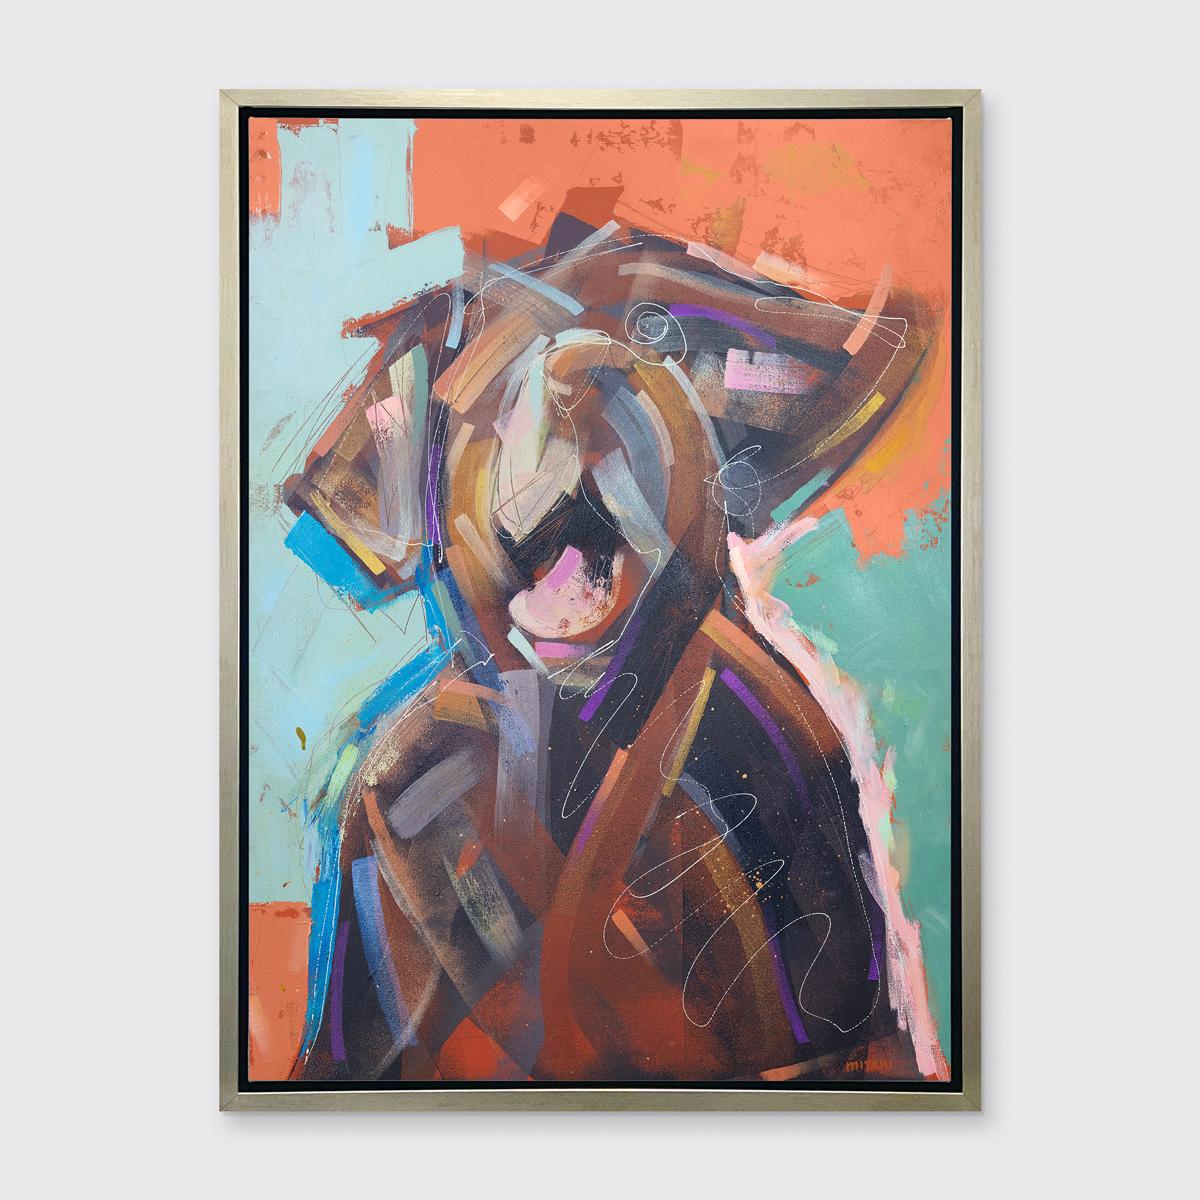 Russell Miyaki Abstract Print - "Brown Lab" Limited Edition Giclee Print, 60" x 45"